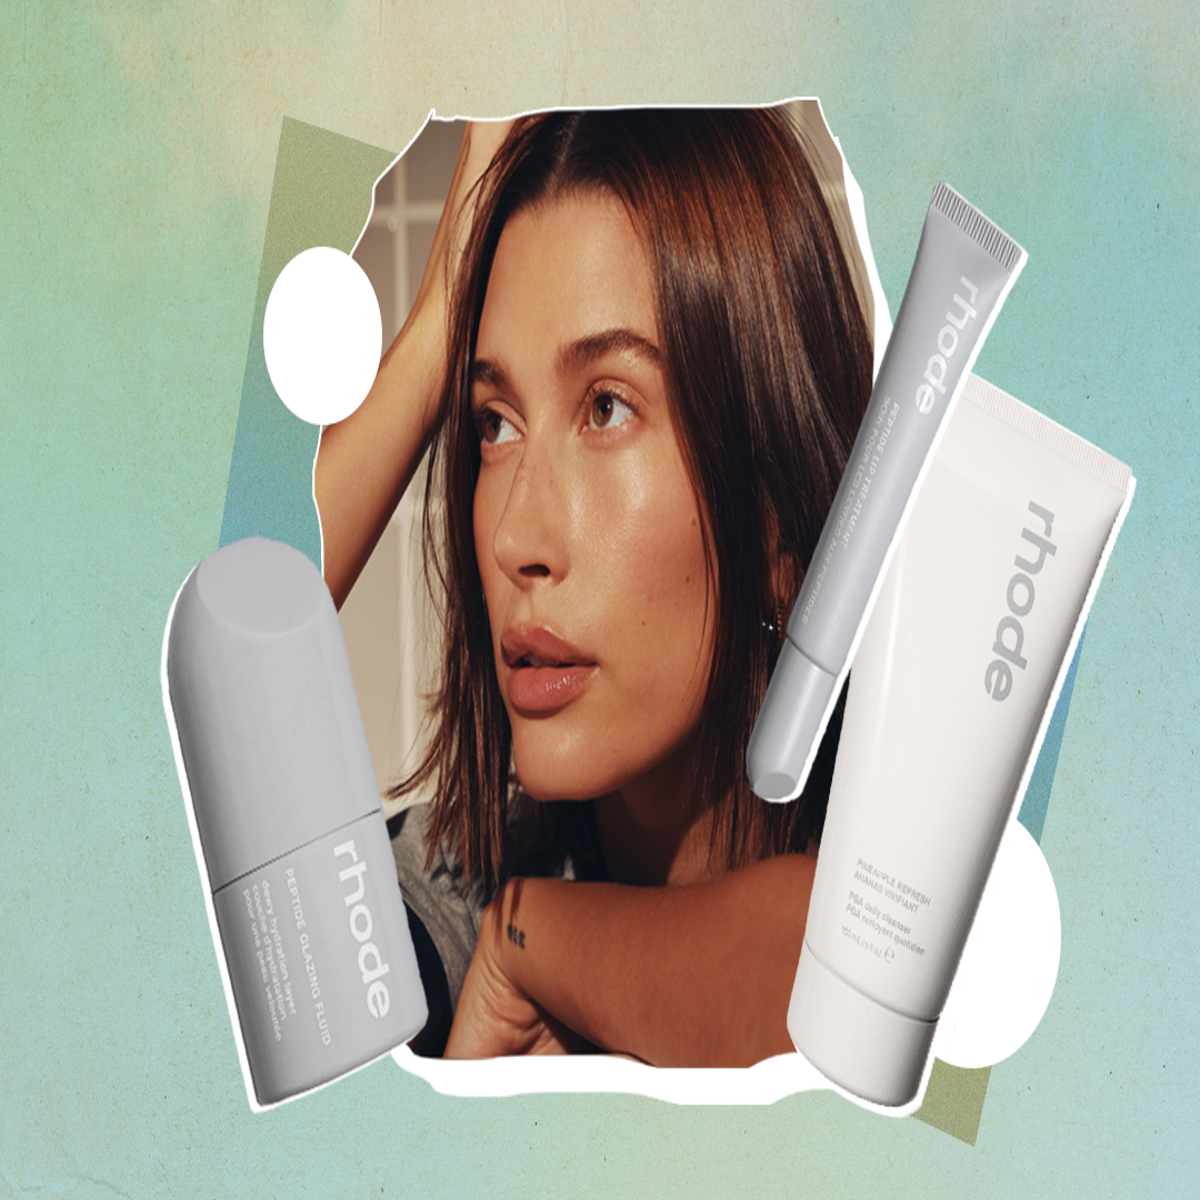 Rhode skincare review: Is Hailey Bieber's skincare brand any good